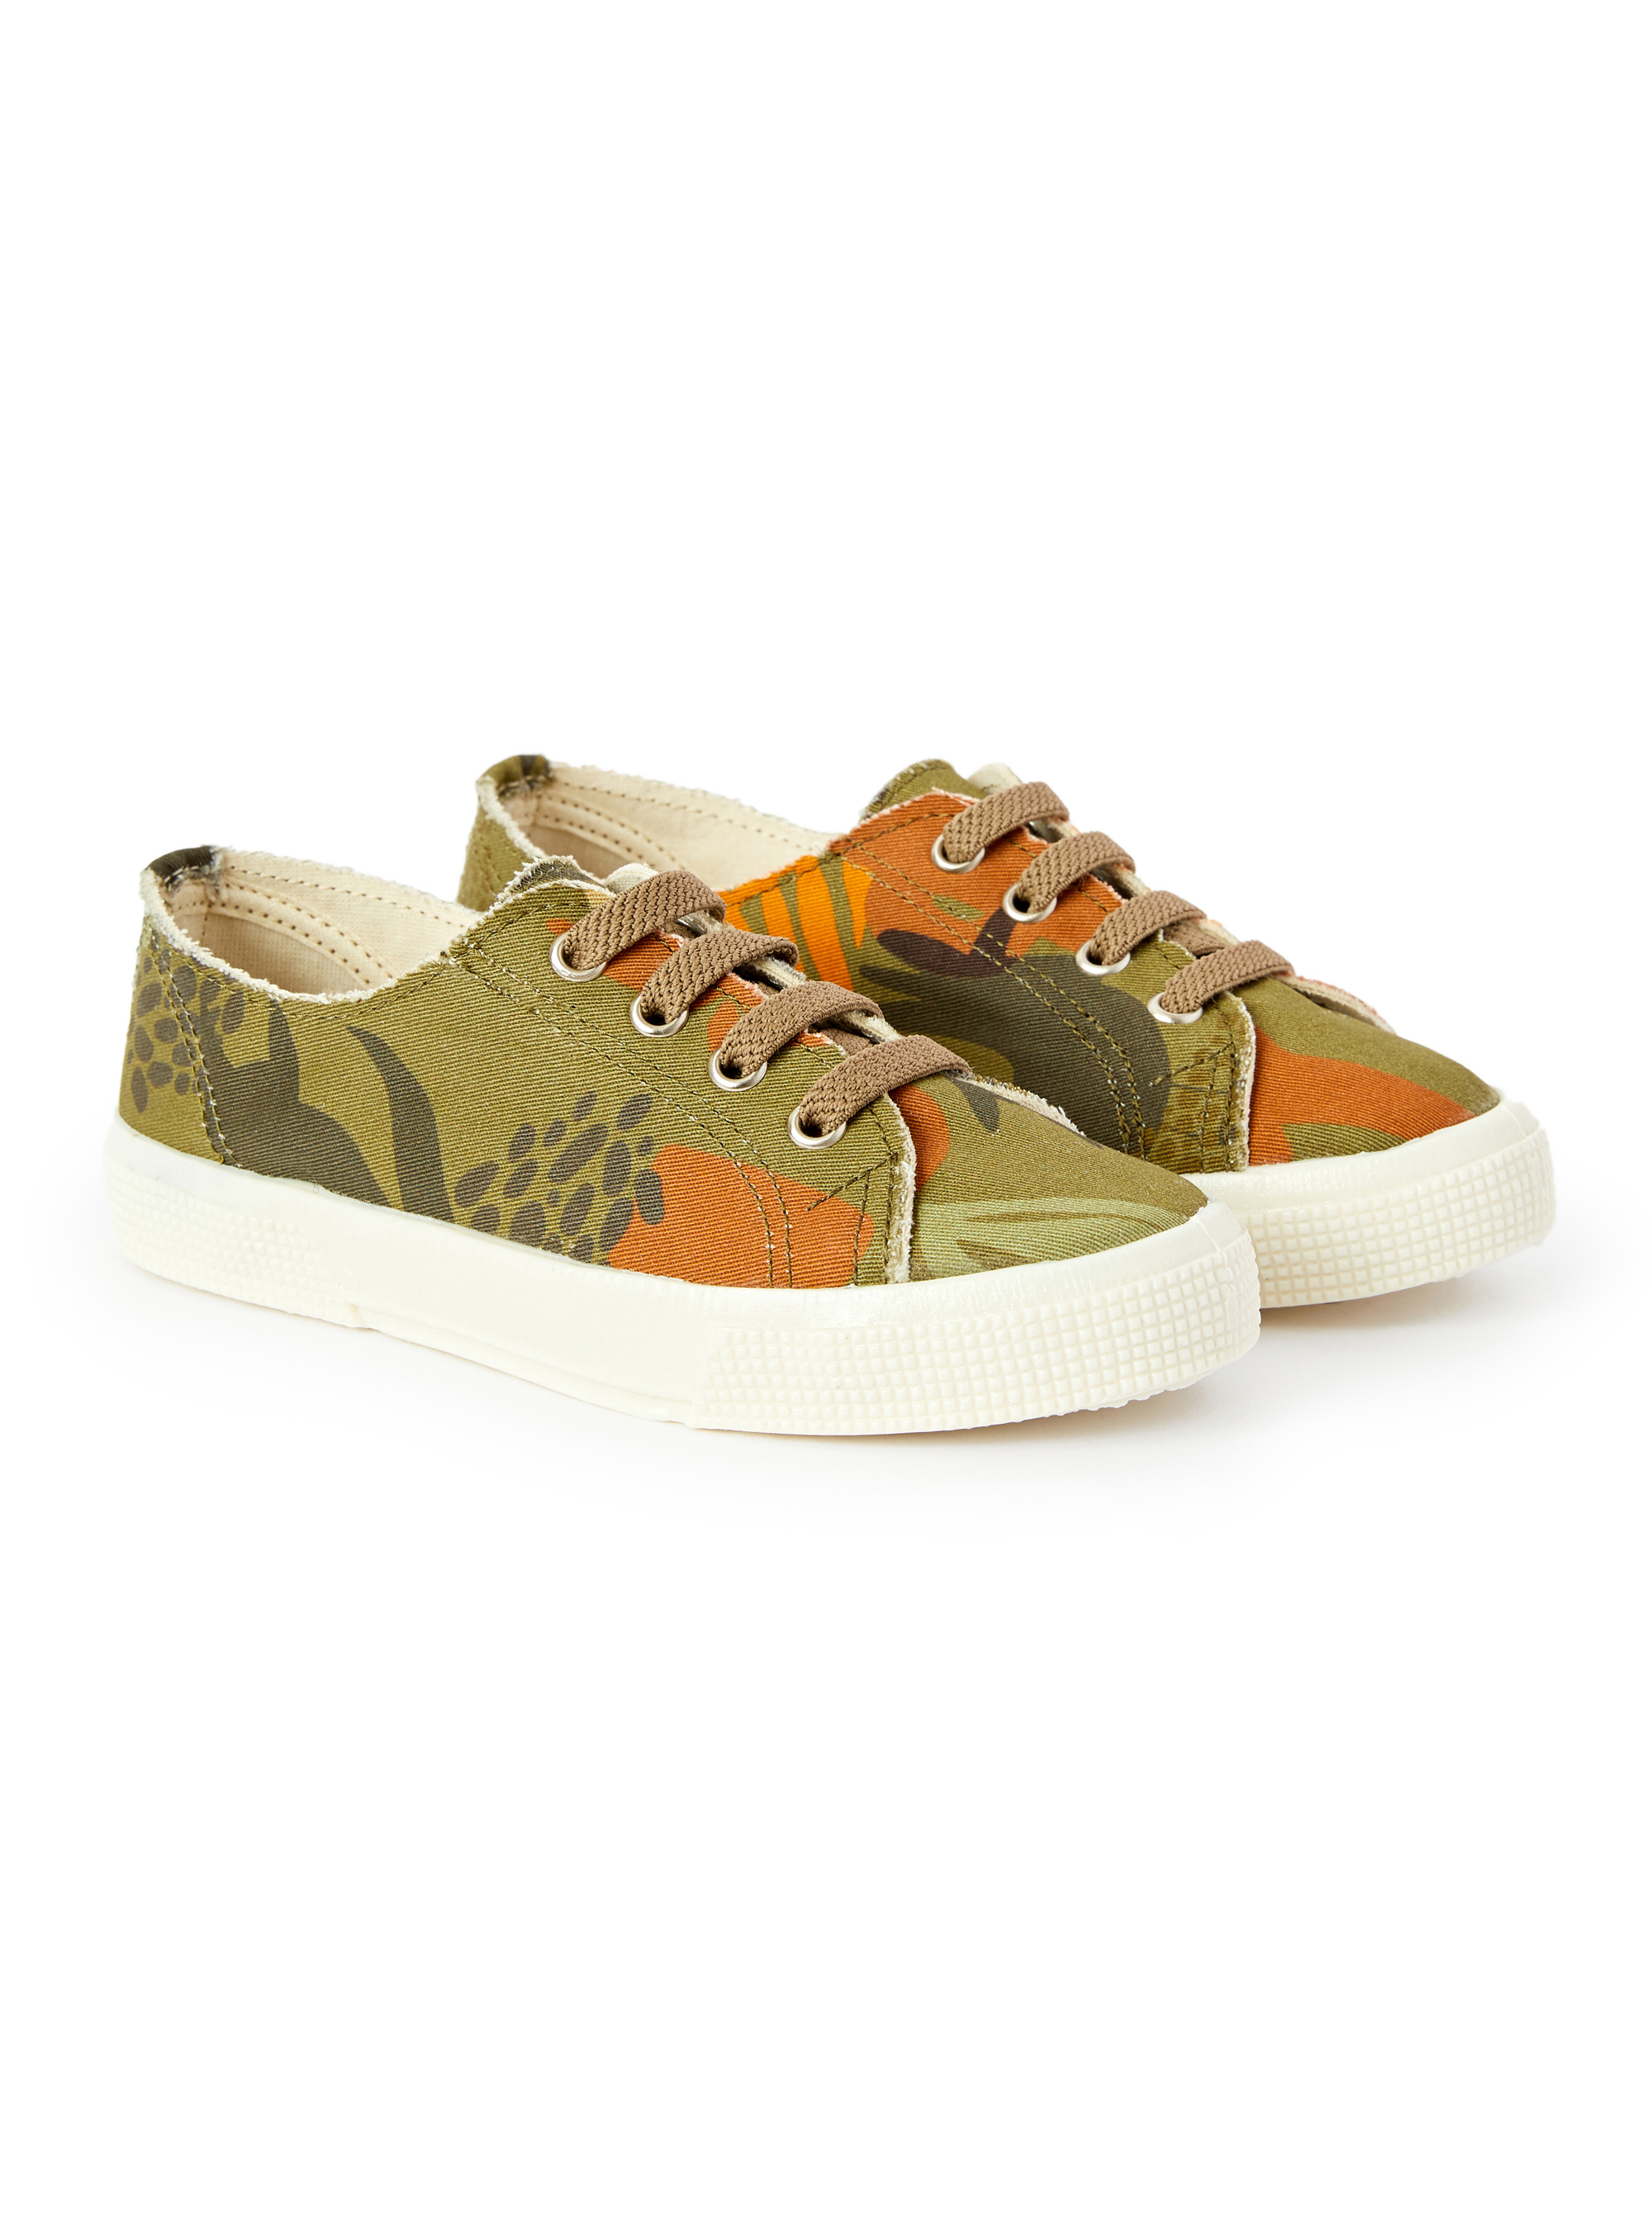 Canvas sneakers with camoufarm print - Shoes - Il Gufo